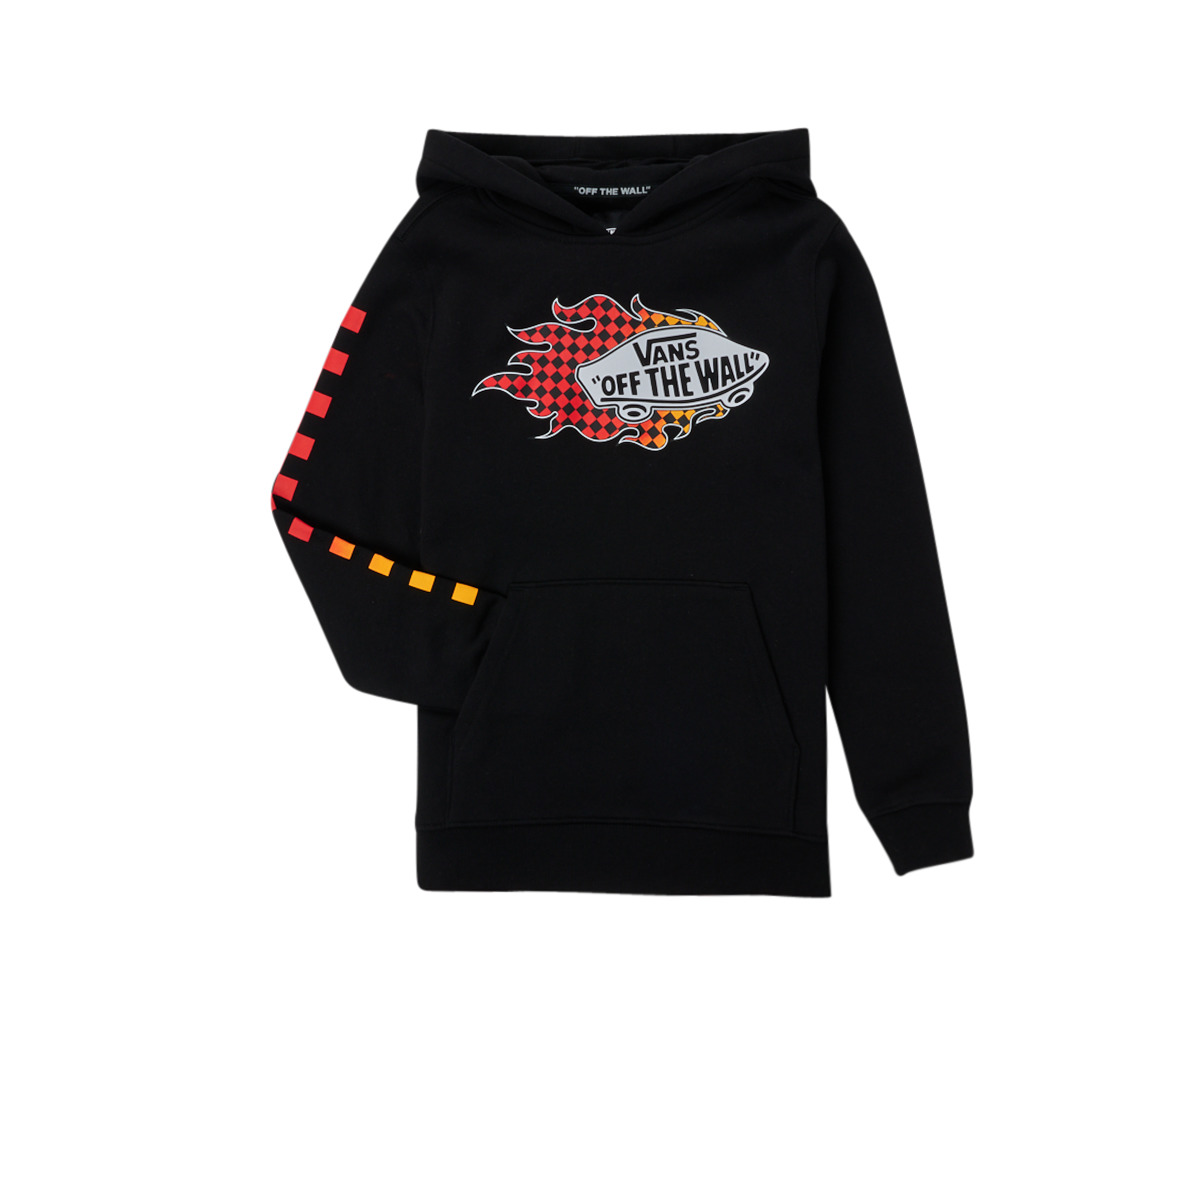 Vans LOGO PO NET sweaters Clothing Spartoo ! delivery Child - Free | - Black